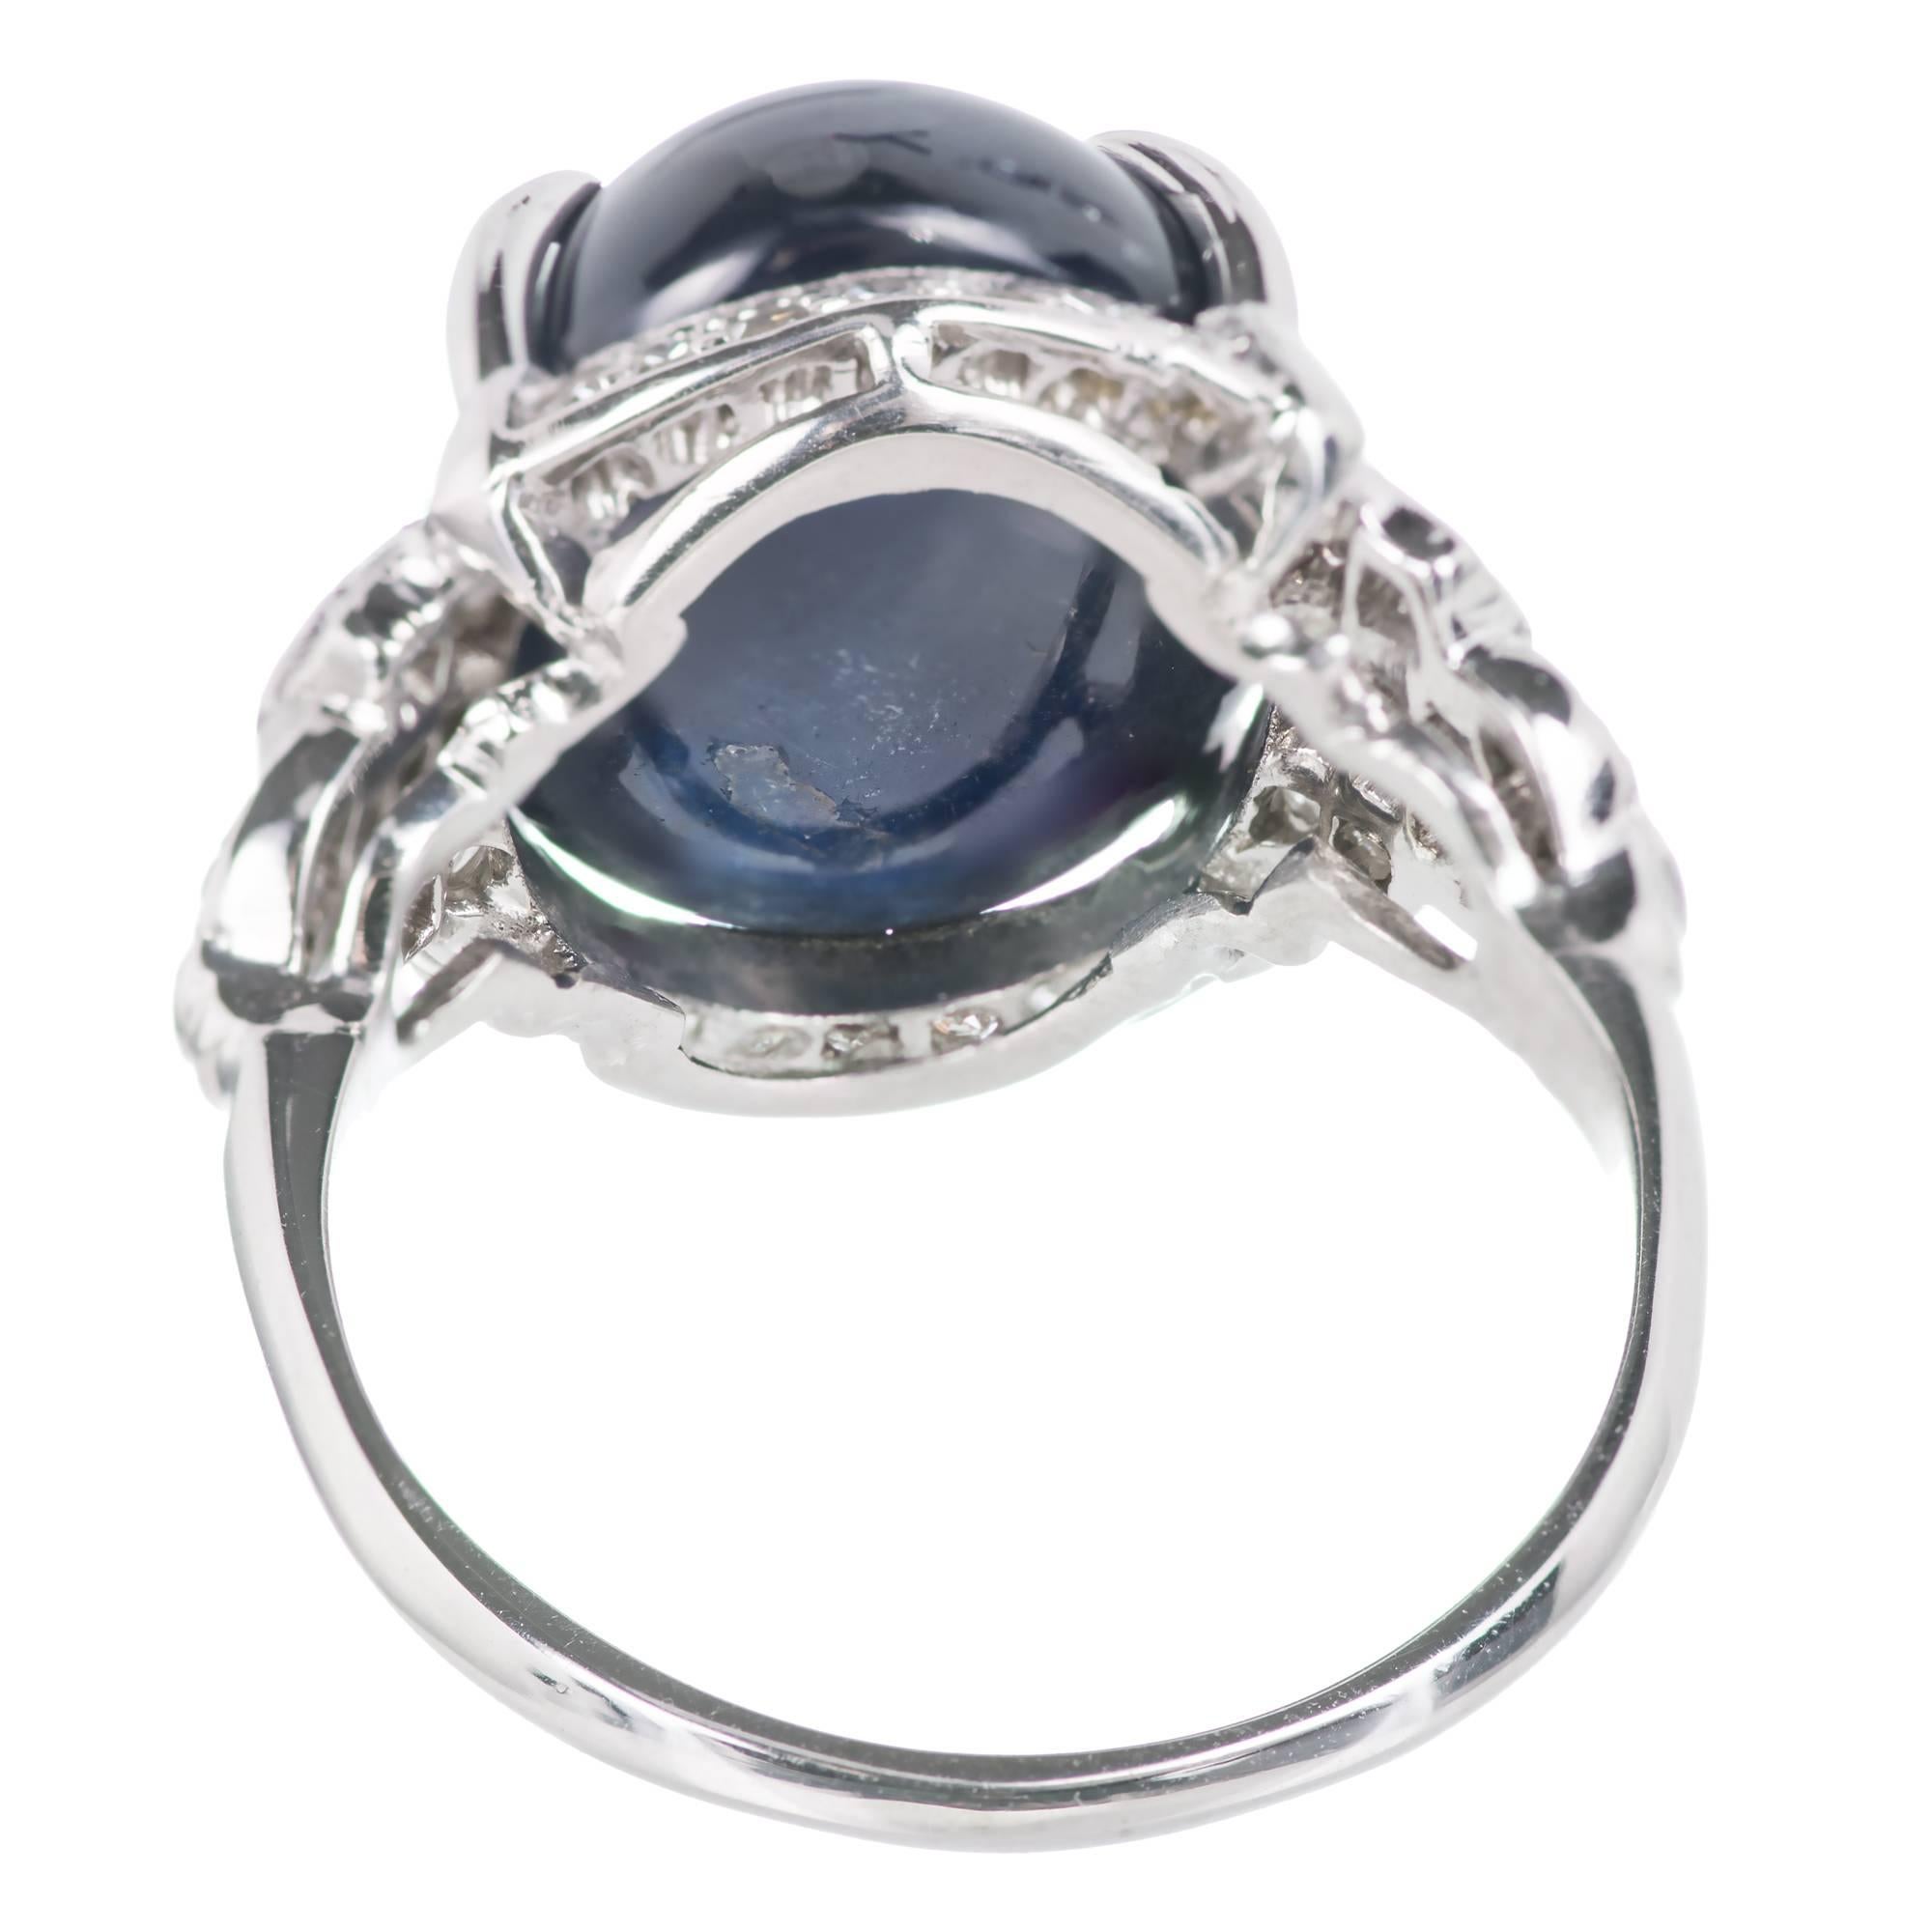 Art Deco 1920's Sapphire and diamond platinum engagement ring set with Emerald cut and round cut diamonds that surround a deep Royal blue semitransparent cabochon Sapphire approx 12.13 ct. GIA certified, CMG 1 origin, natural sapphire, simple low